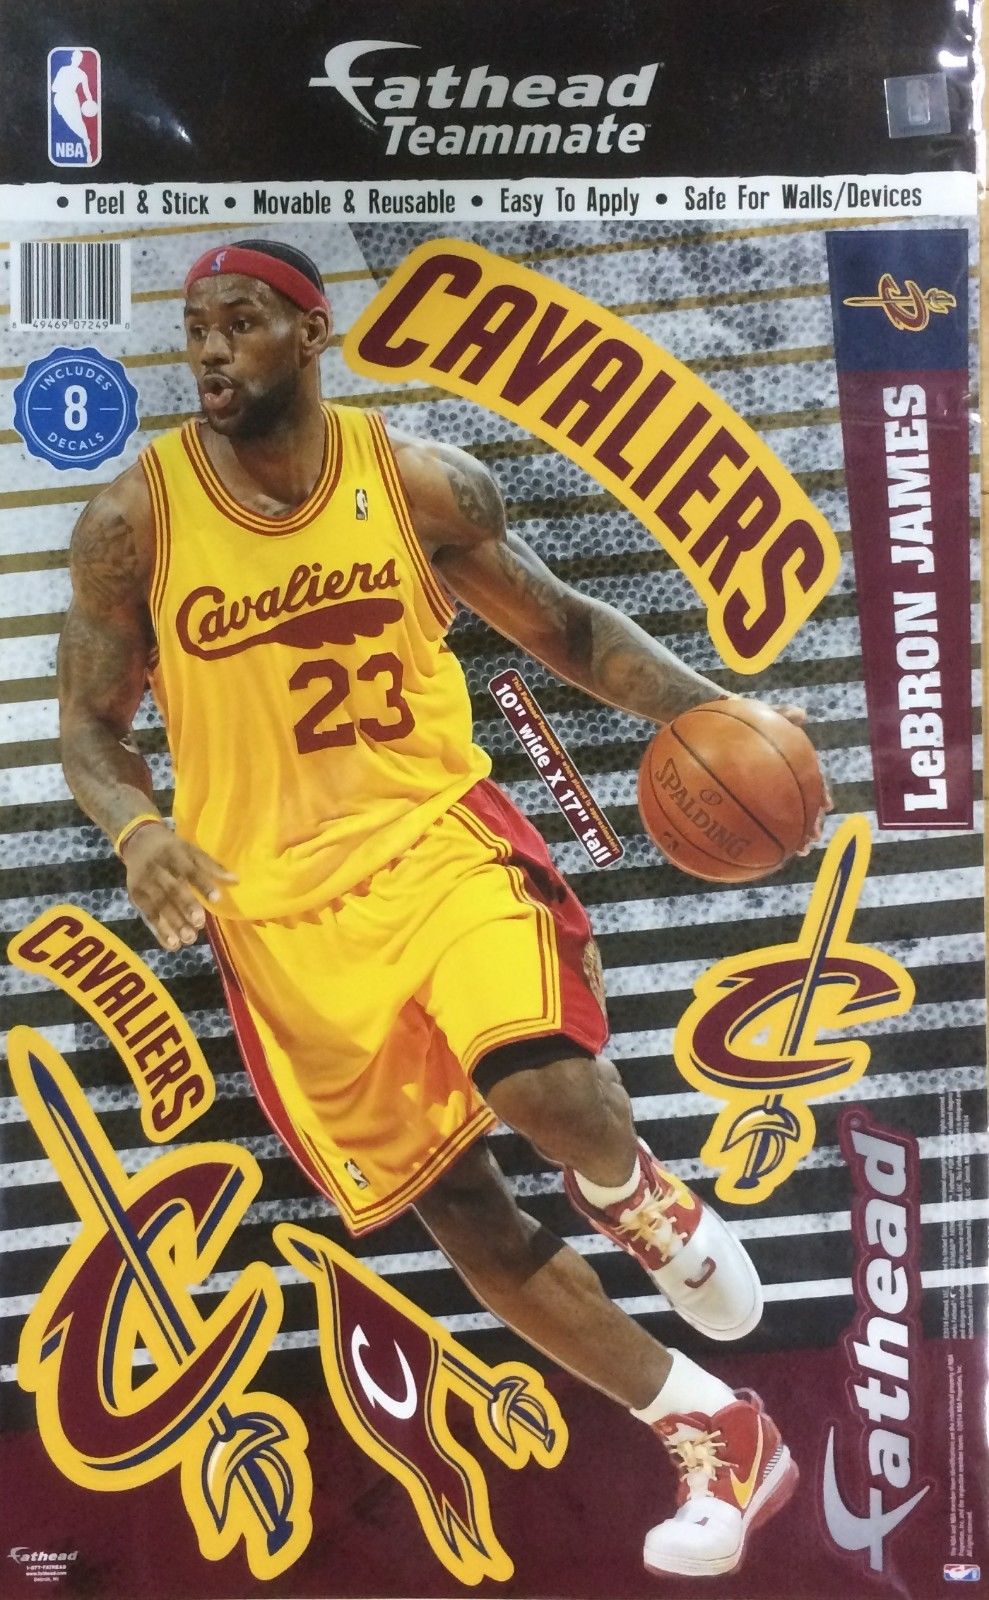 Lebron James Cleveland Cavaliers Fathead Teammate Wall Decal NBA 12″x17″H new